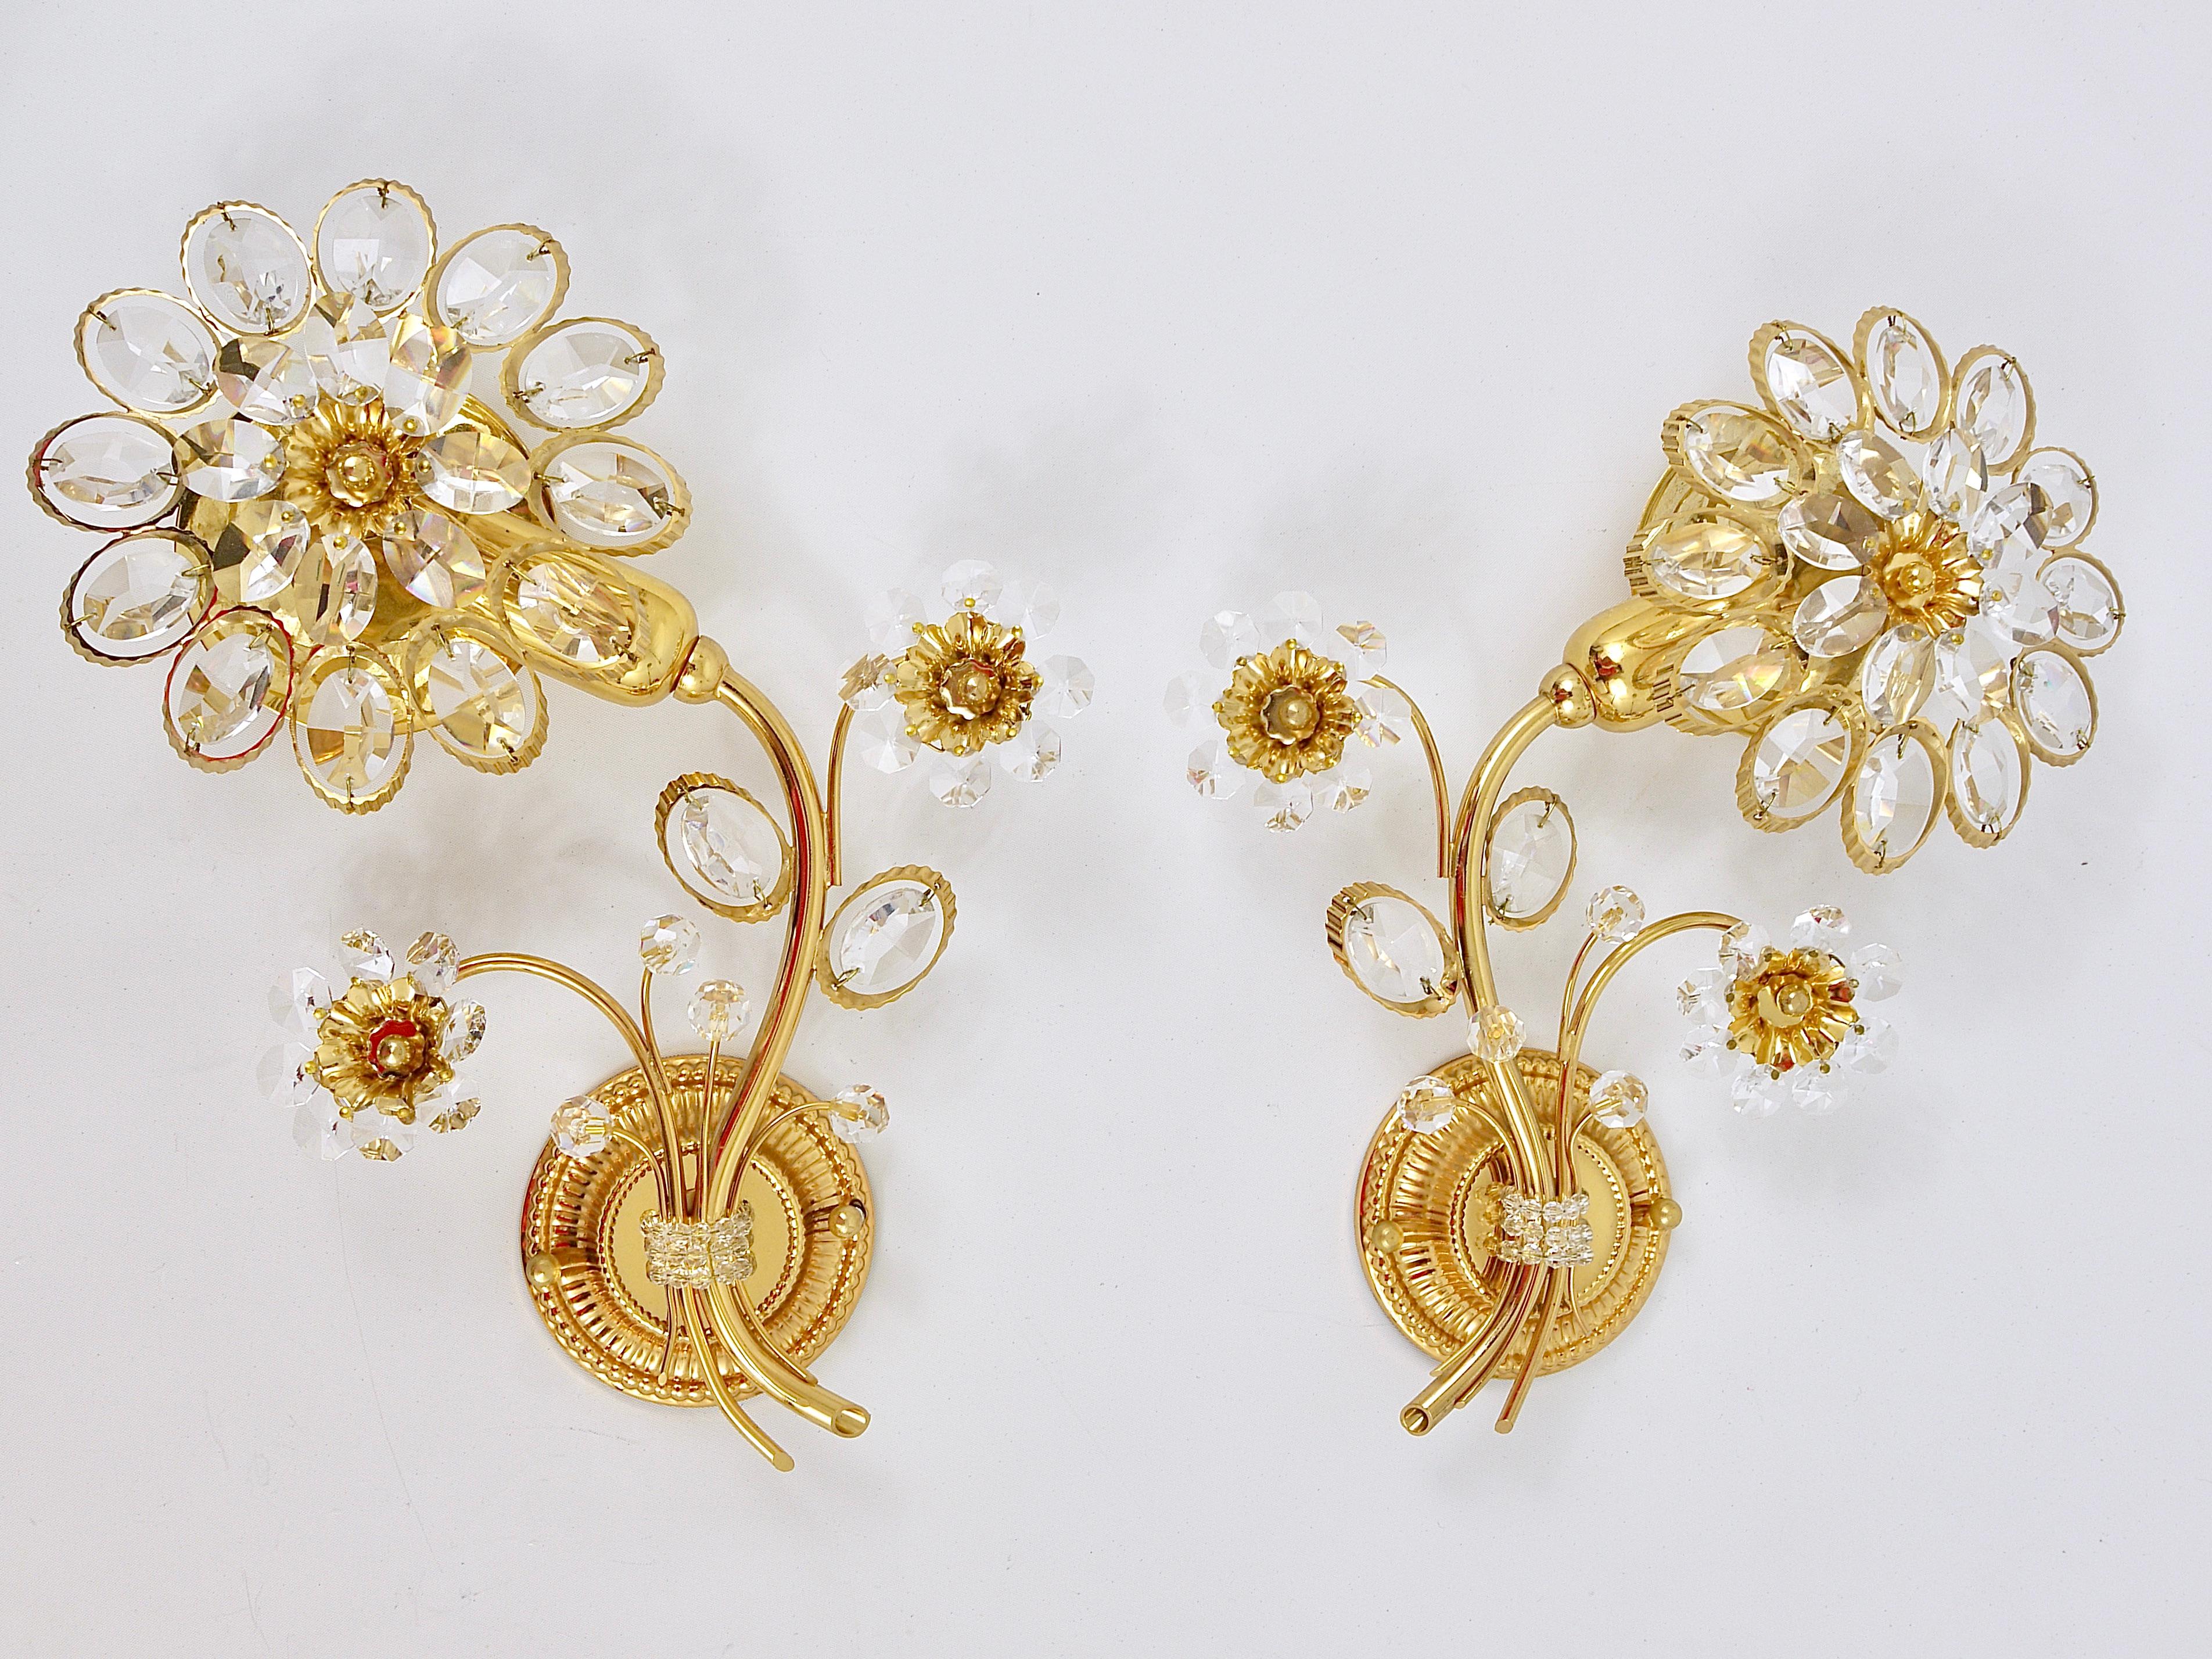 Pair of Palwa Gilt Brass Flower Wall Lights with Crystals, Germany, 1970s For Sale 1